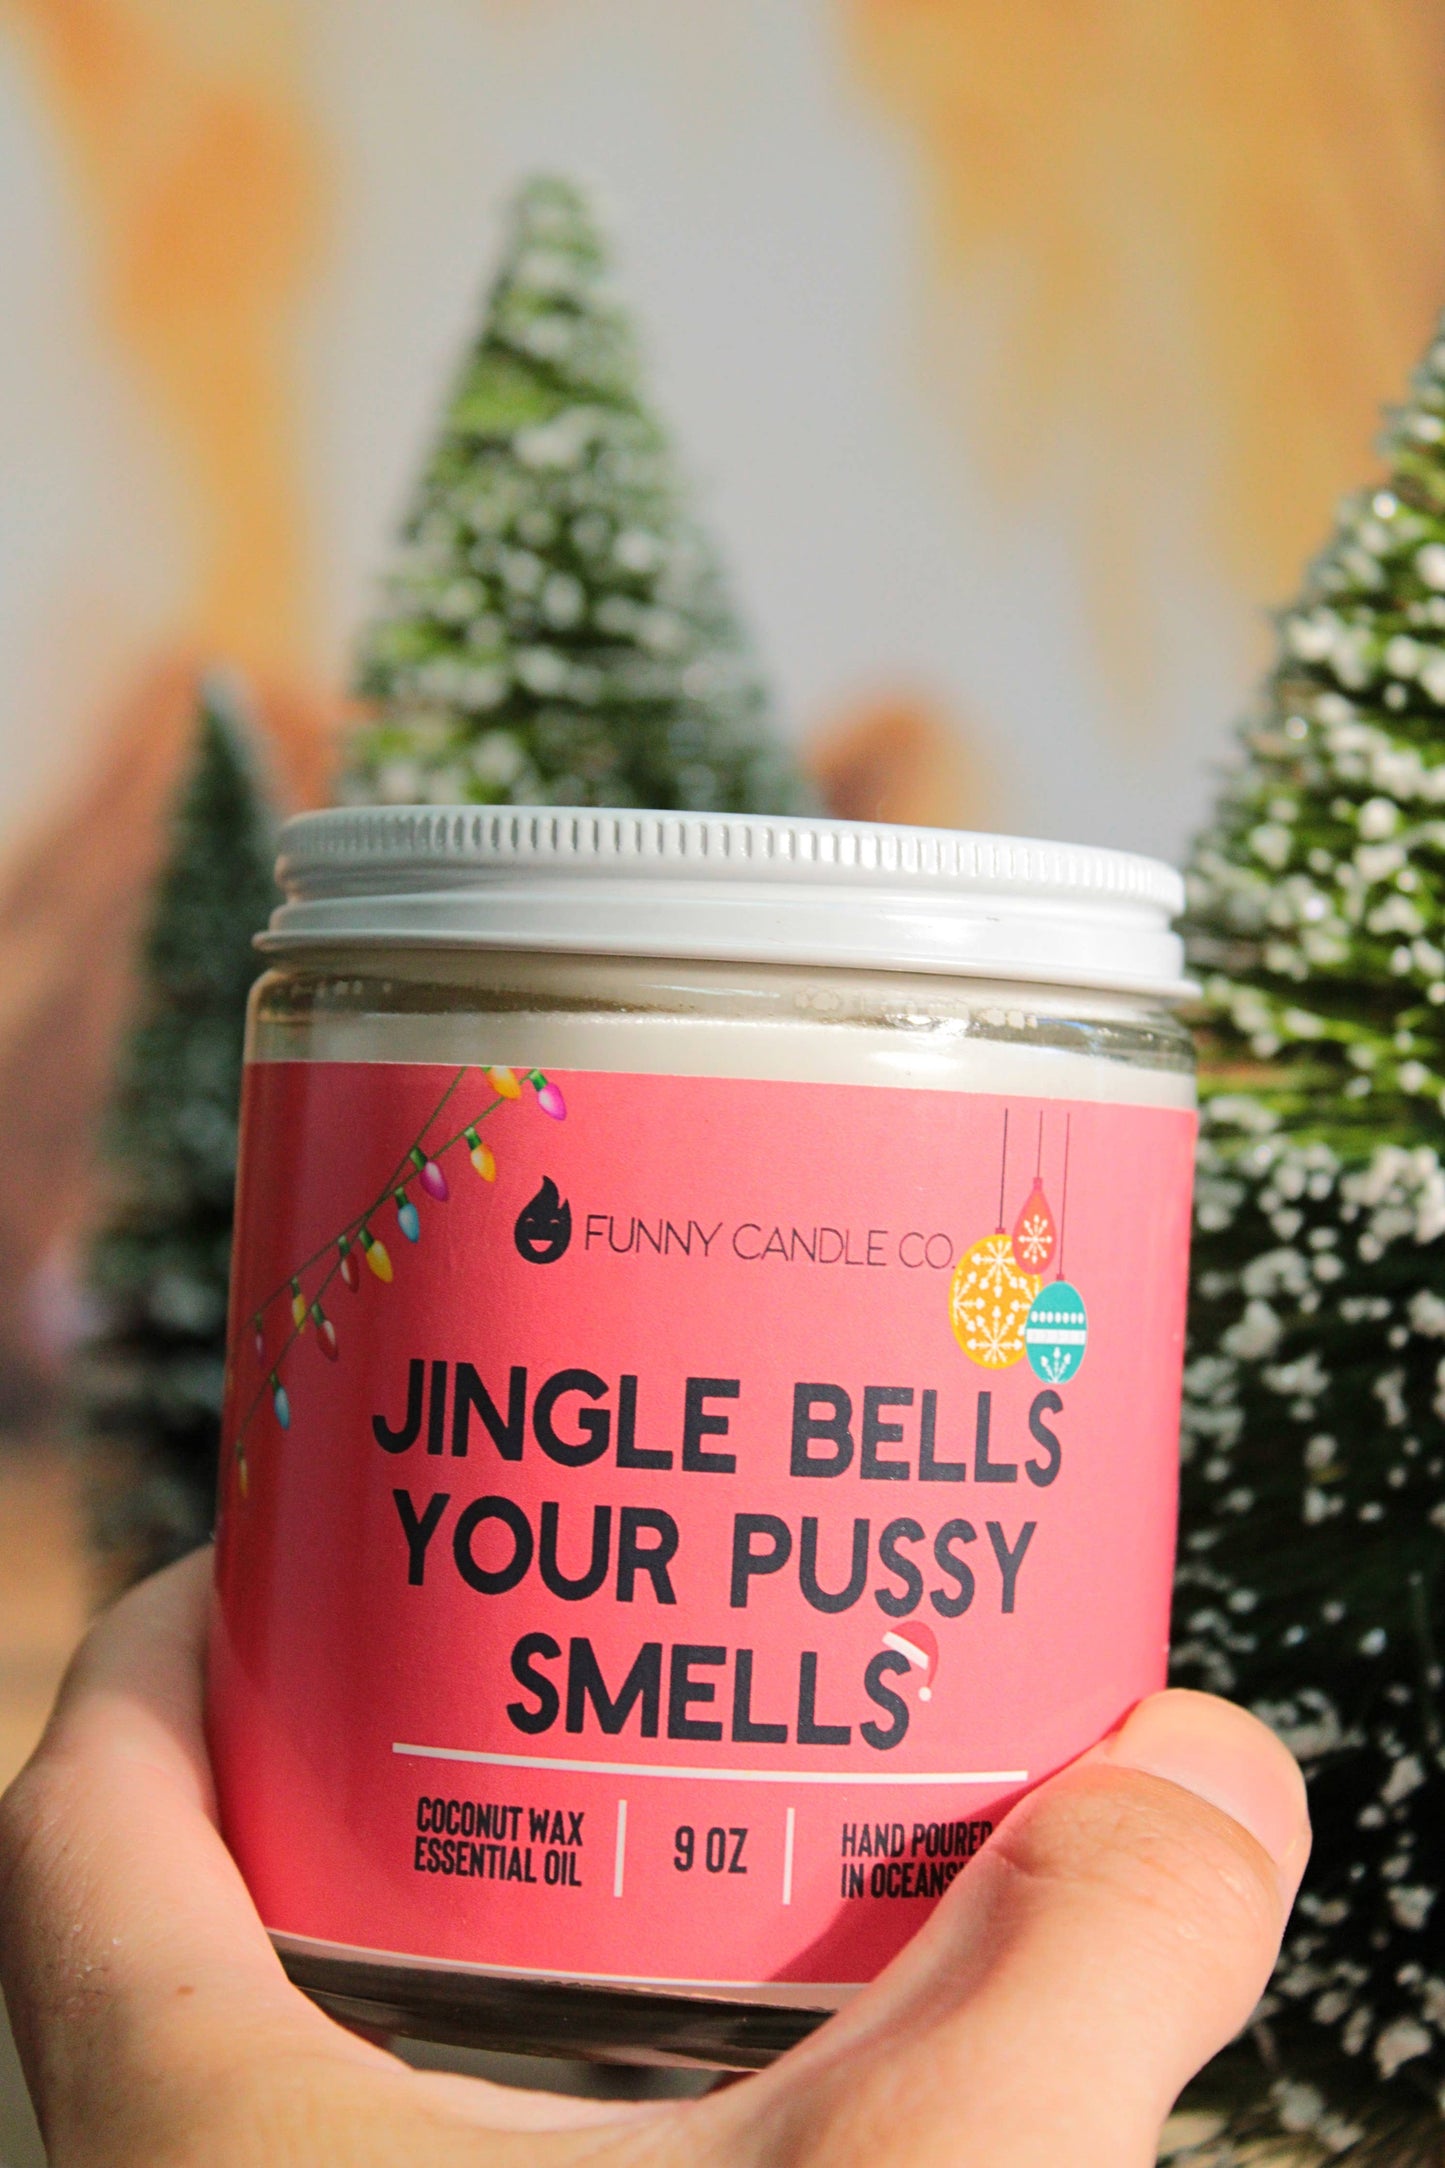 Jingle Bells Your Pussy Smells Candle - Funny Xmas Candle